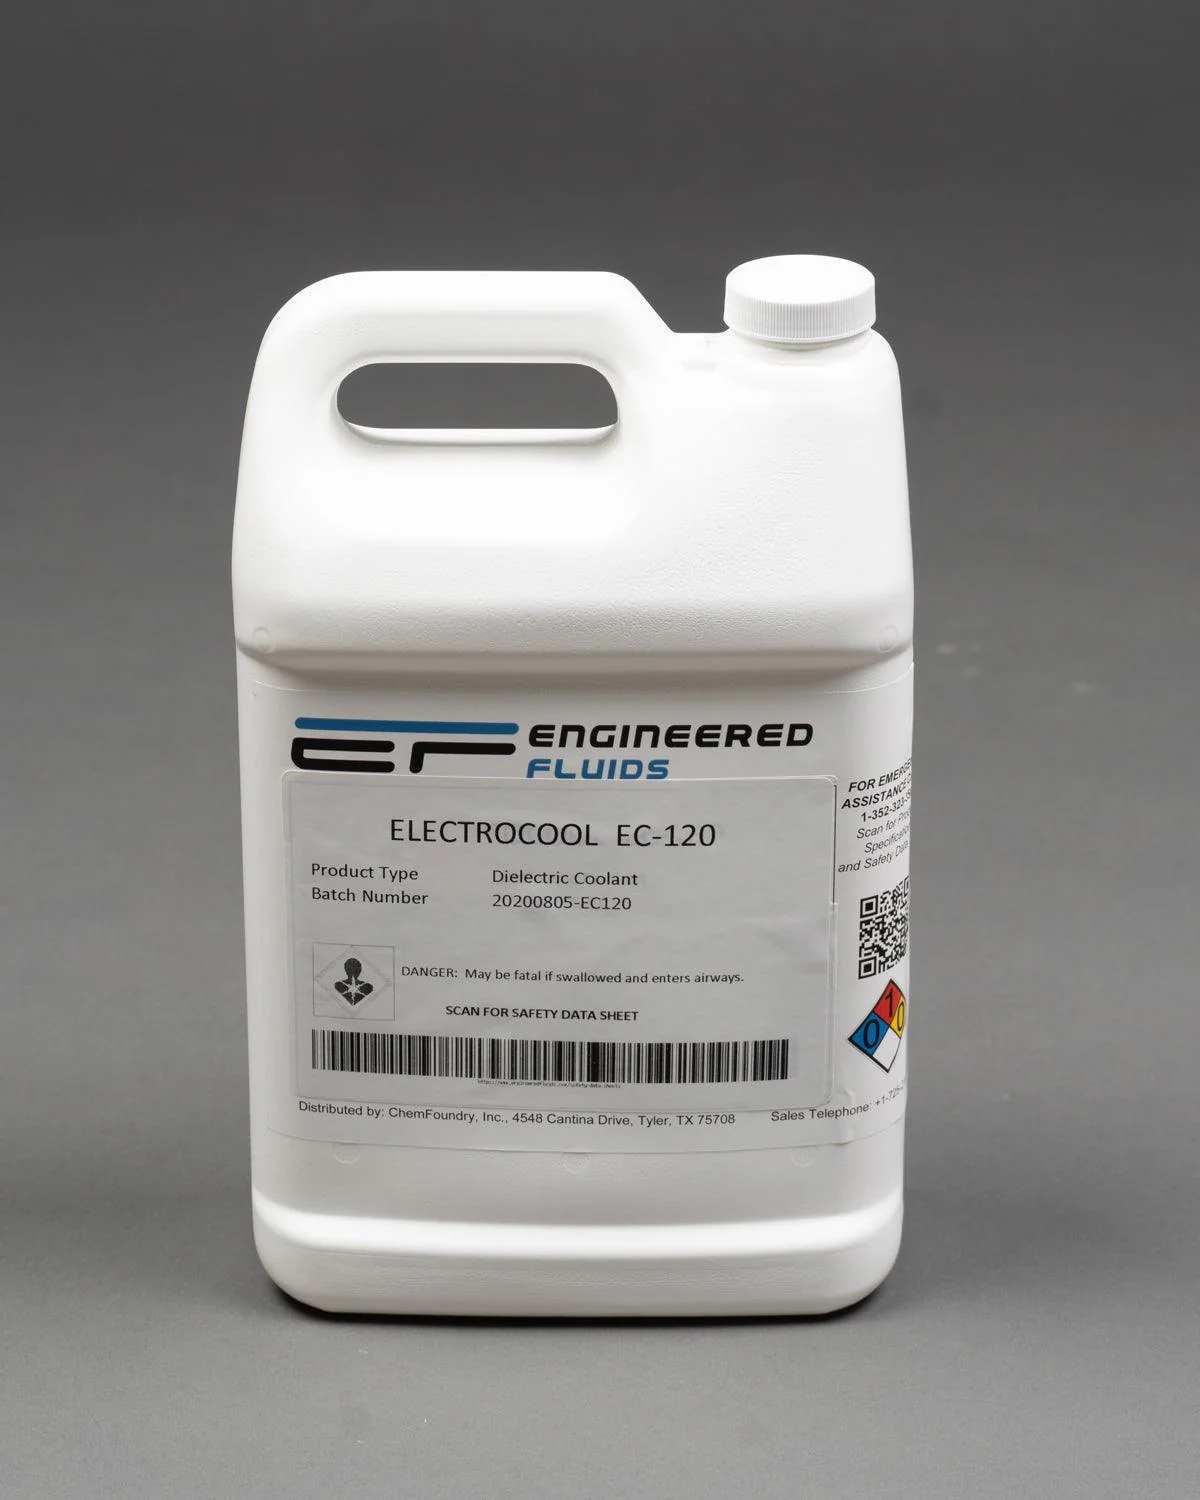 ElectroCool® EC-120 Dielectric Coolant Questions & Answers